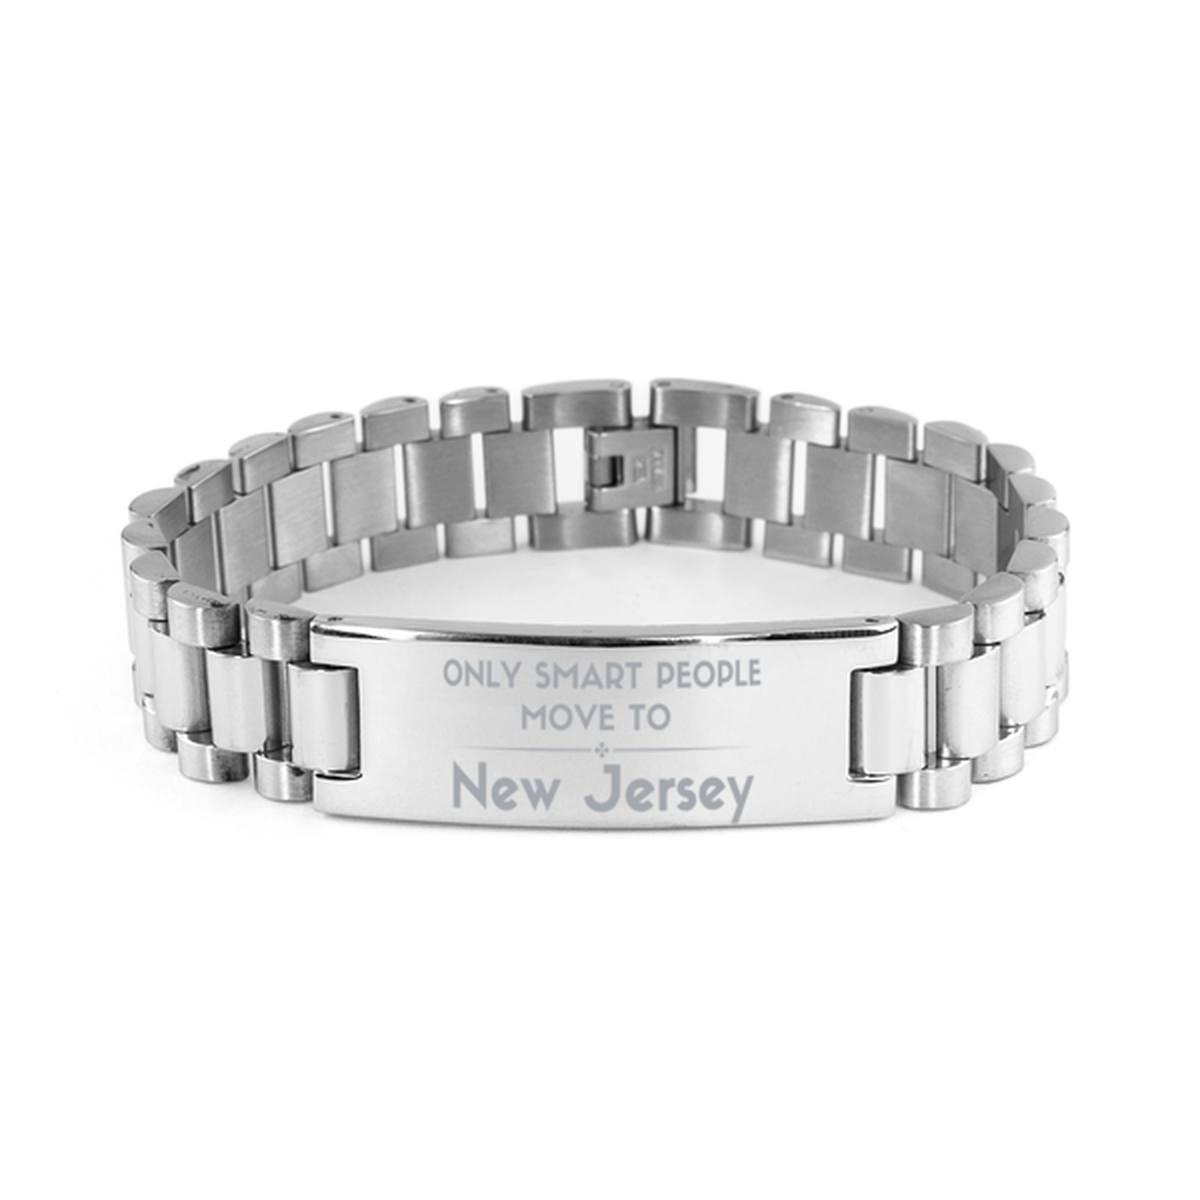 Only smart people move to New Jersey Ladder Stainless Steel Bracelet, Gag Gifts For New Jersey, Move to New Jersey Gifts for Friends Coworker Funny Saying Quote